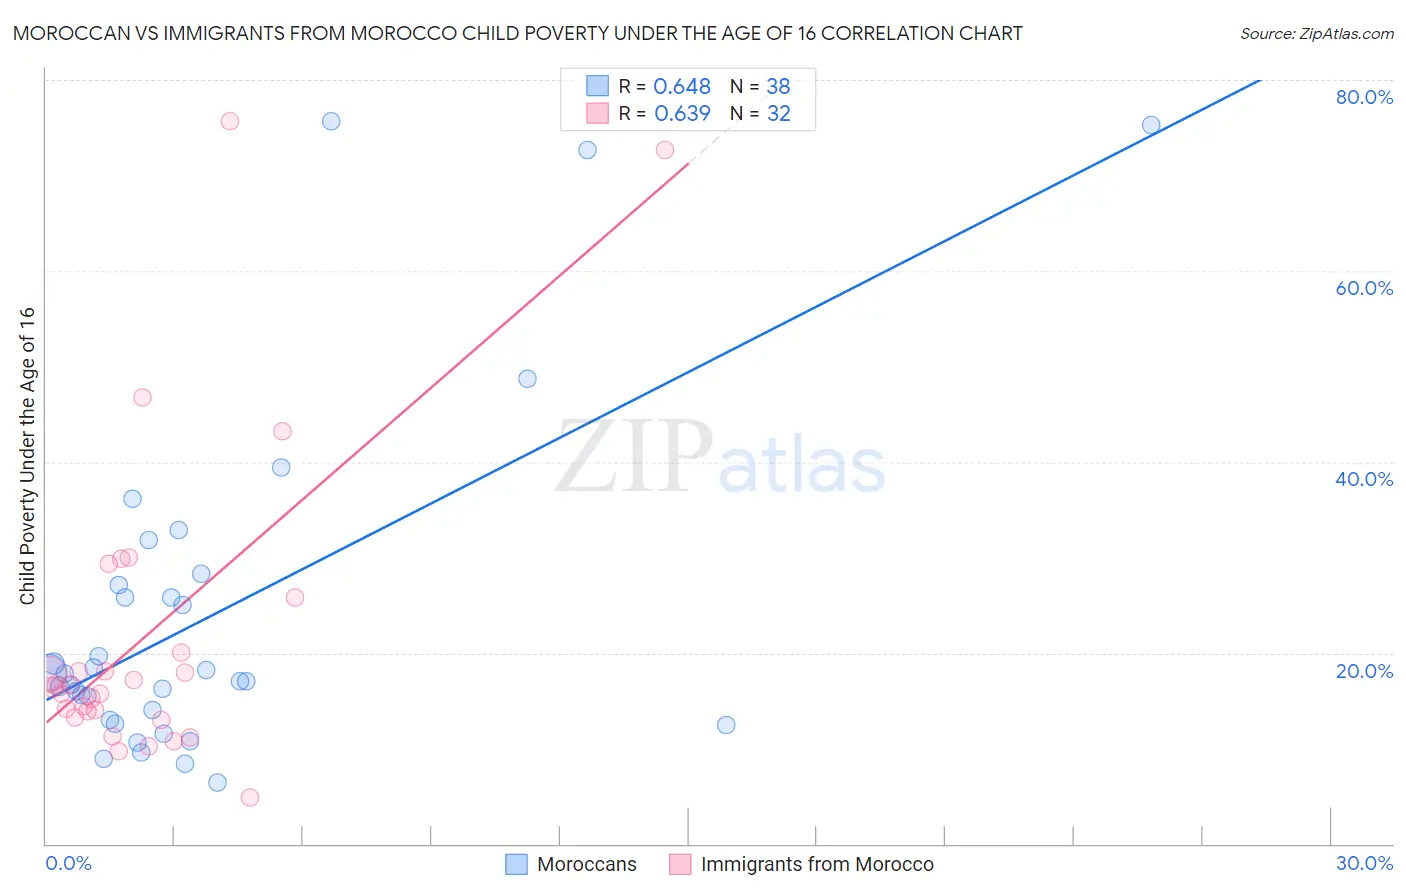 Moroccan vs Immigrants from Morocco Child Poverty Under the Age of 16